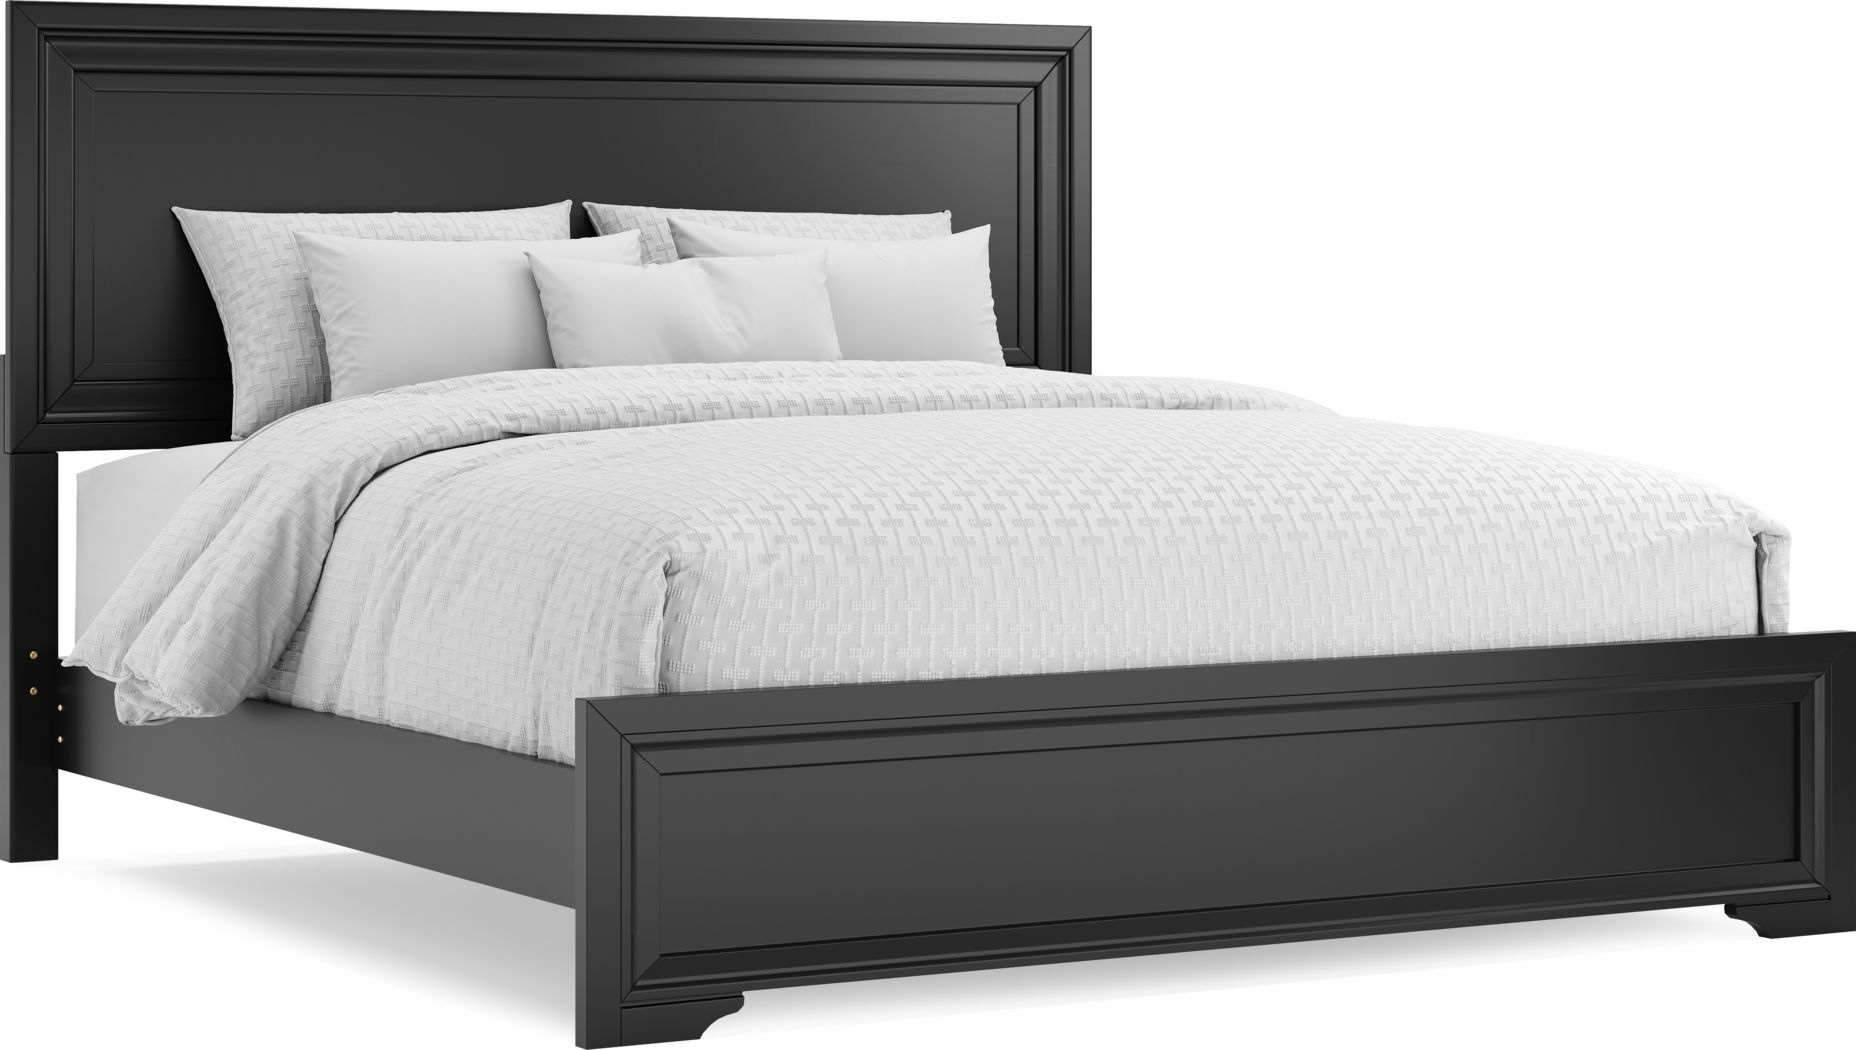 King Beds, Rooms To Go King Size Bed Frame